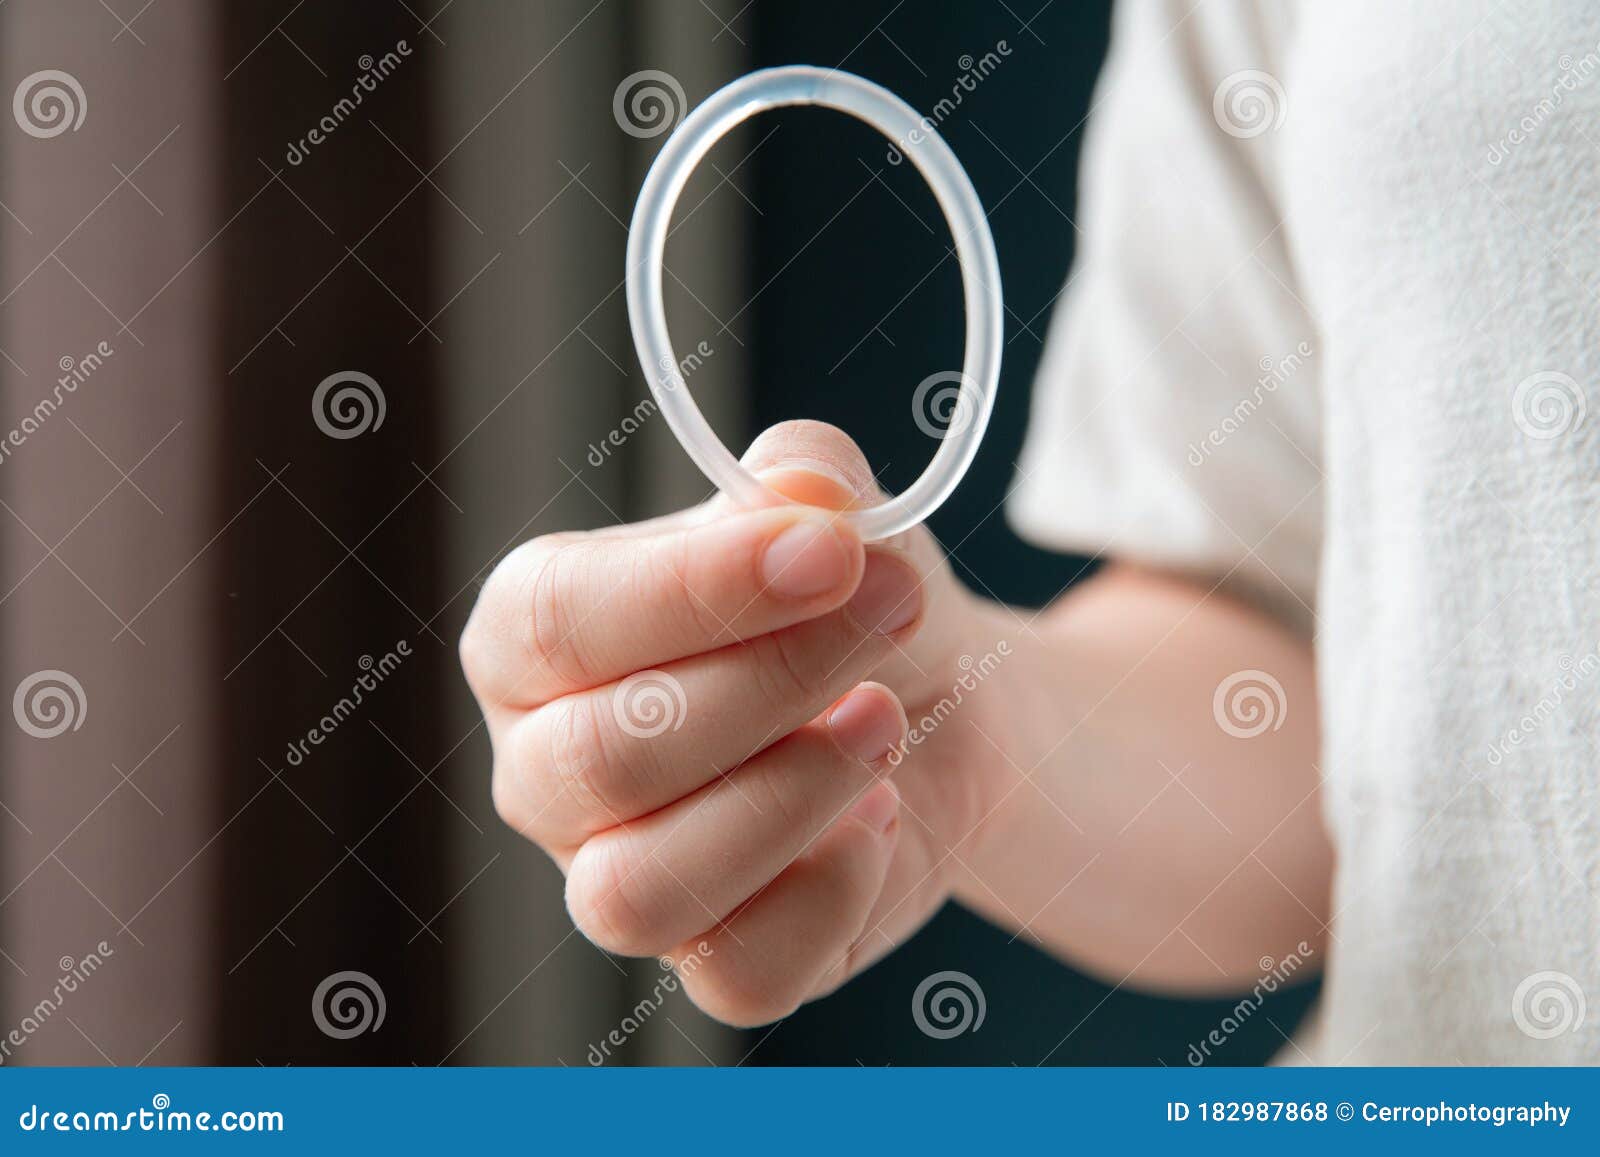 woman`s hand holding a birth control ring, vaginal ring for contraceptive